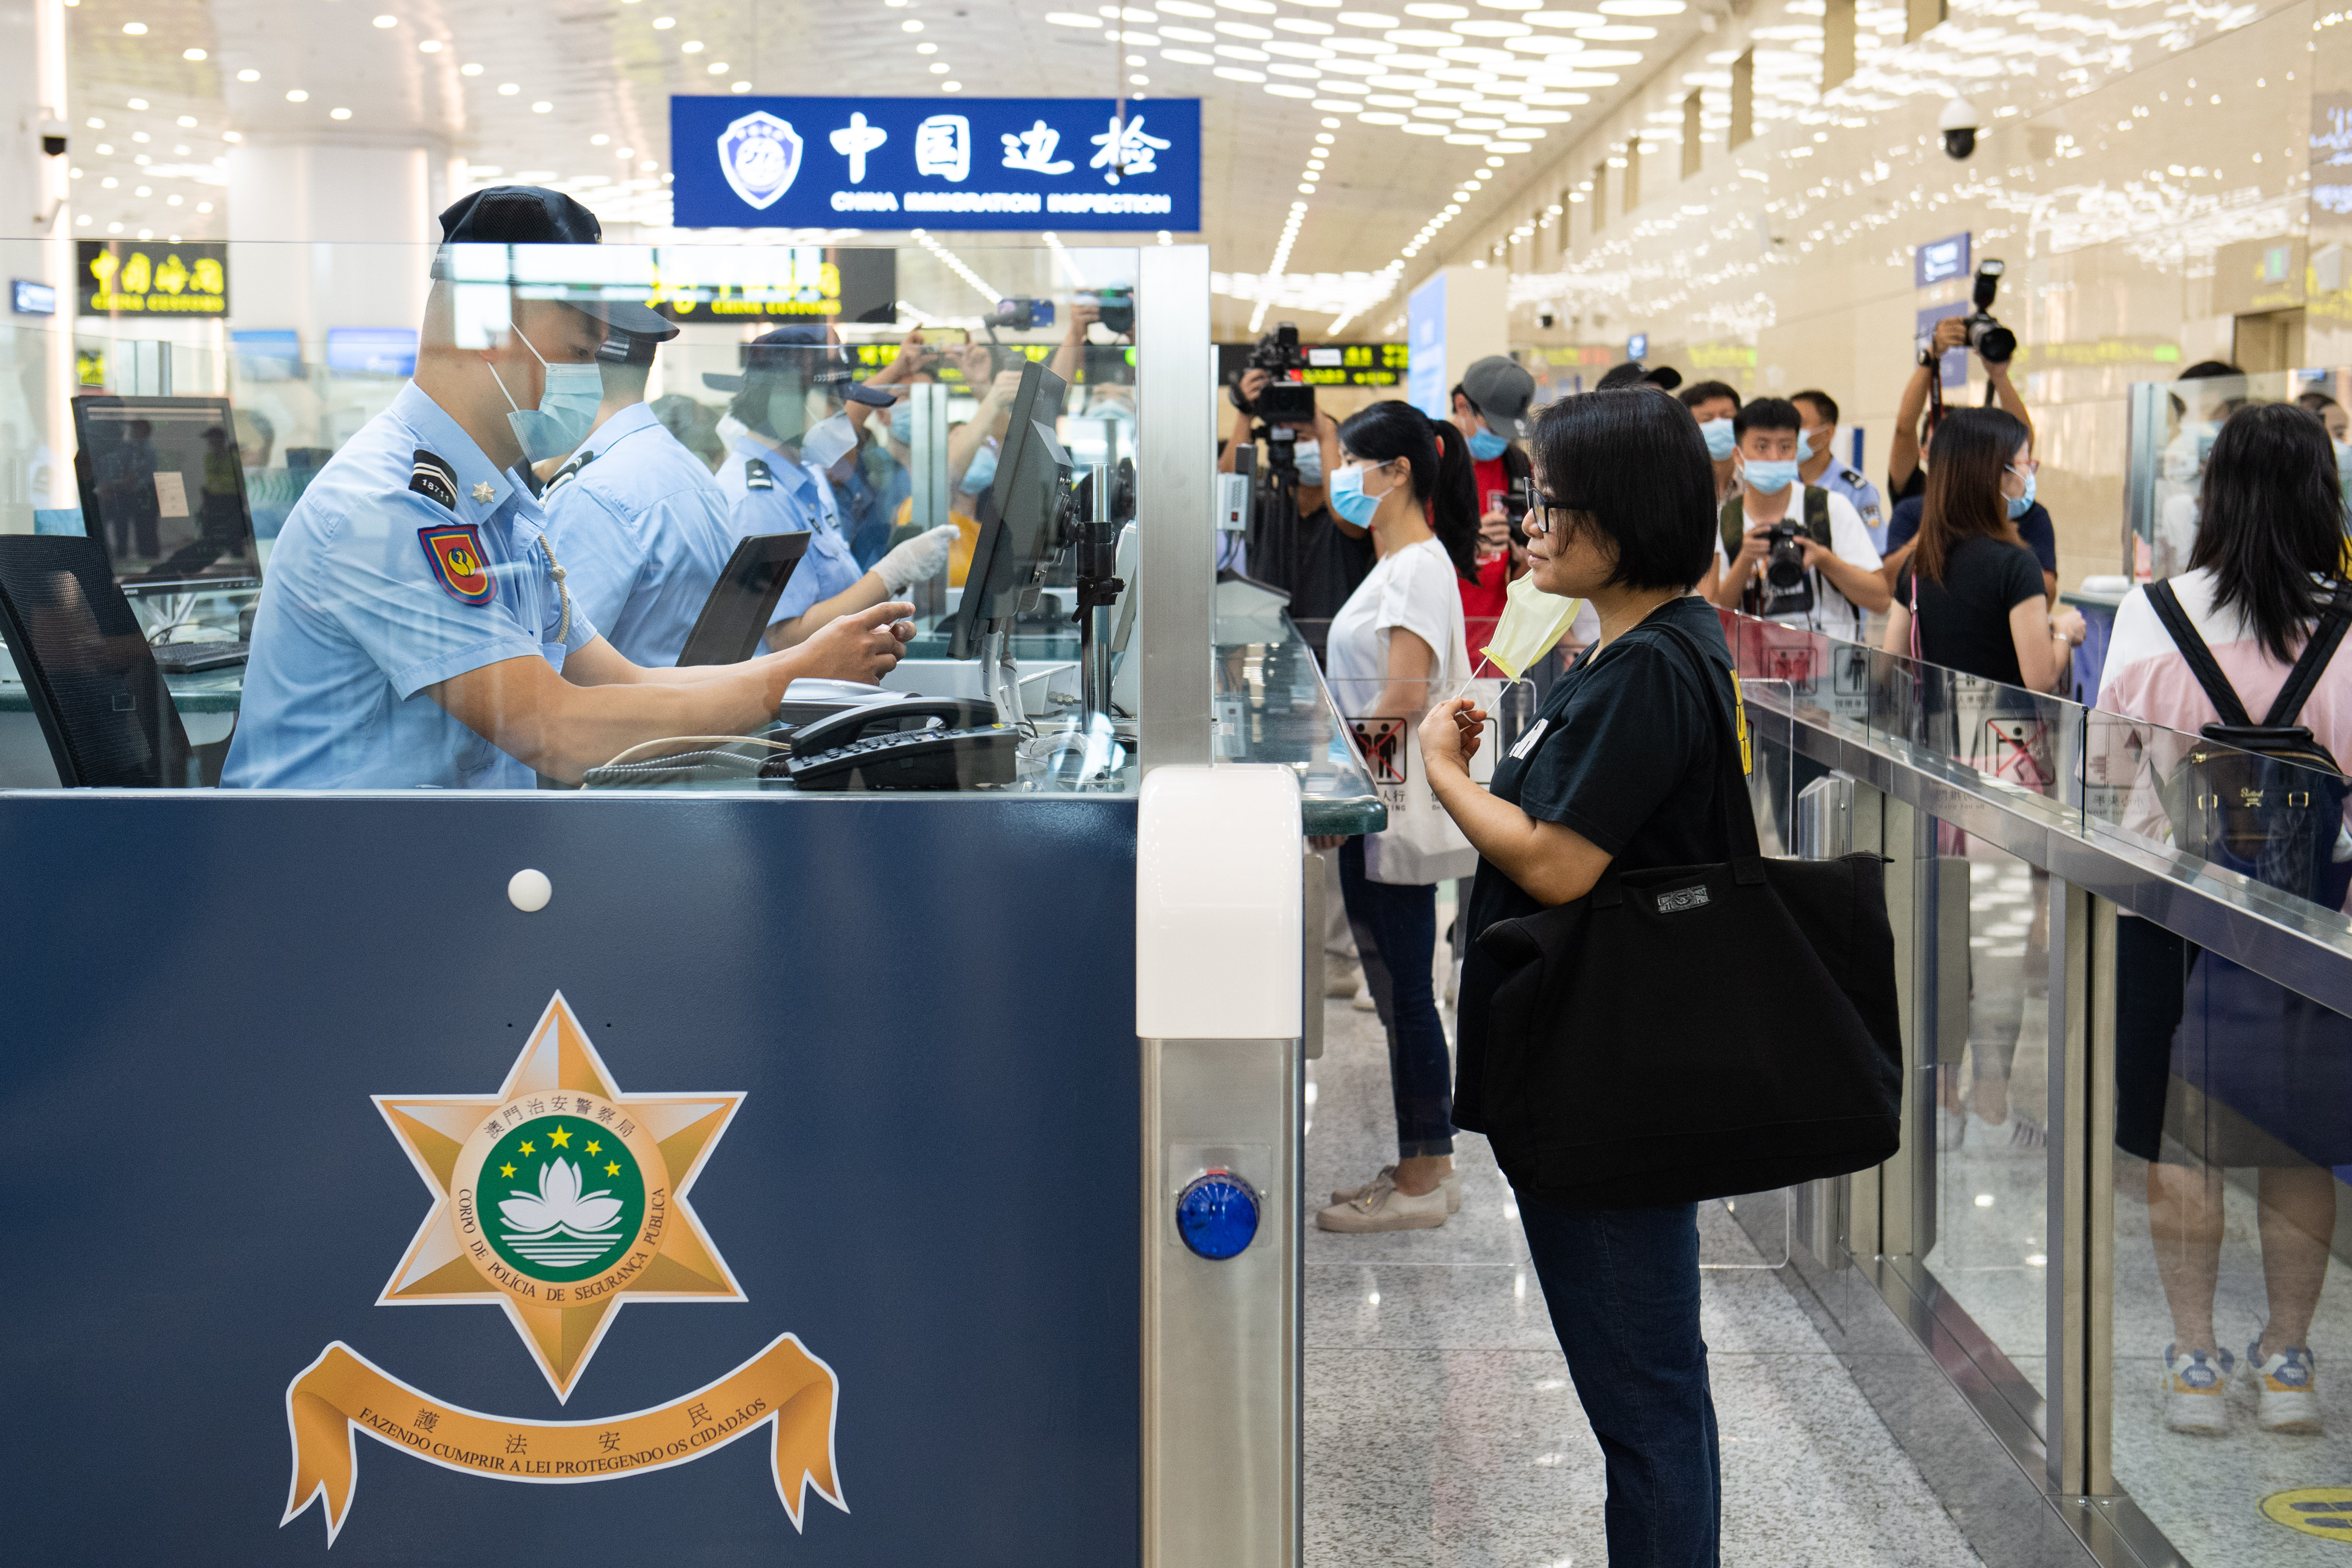 Government declines to predict Golden Week visitor numbers